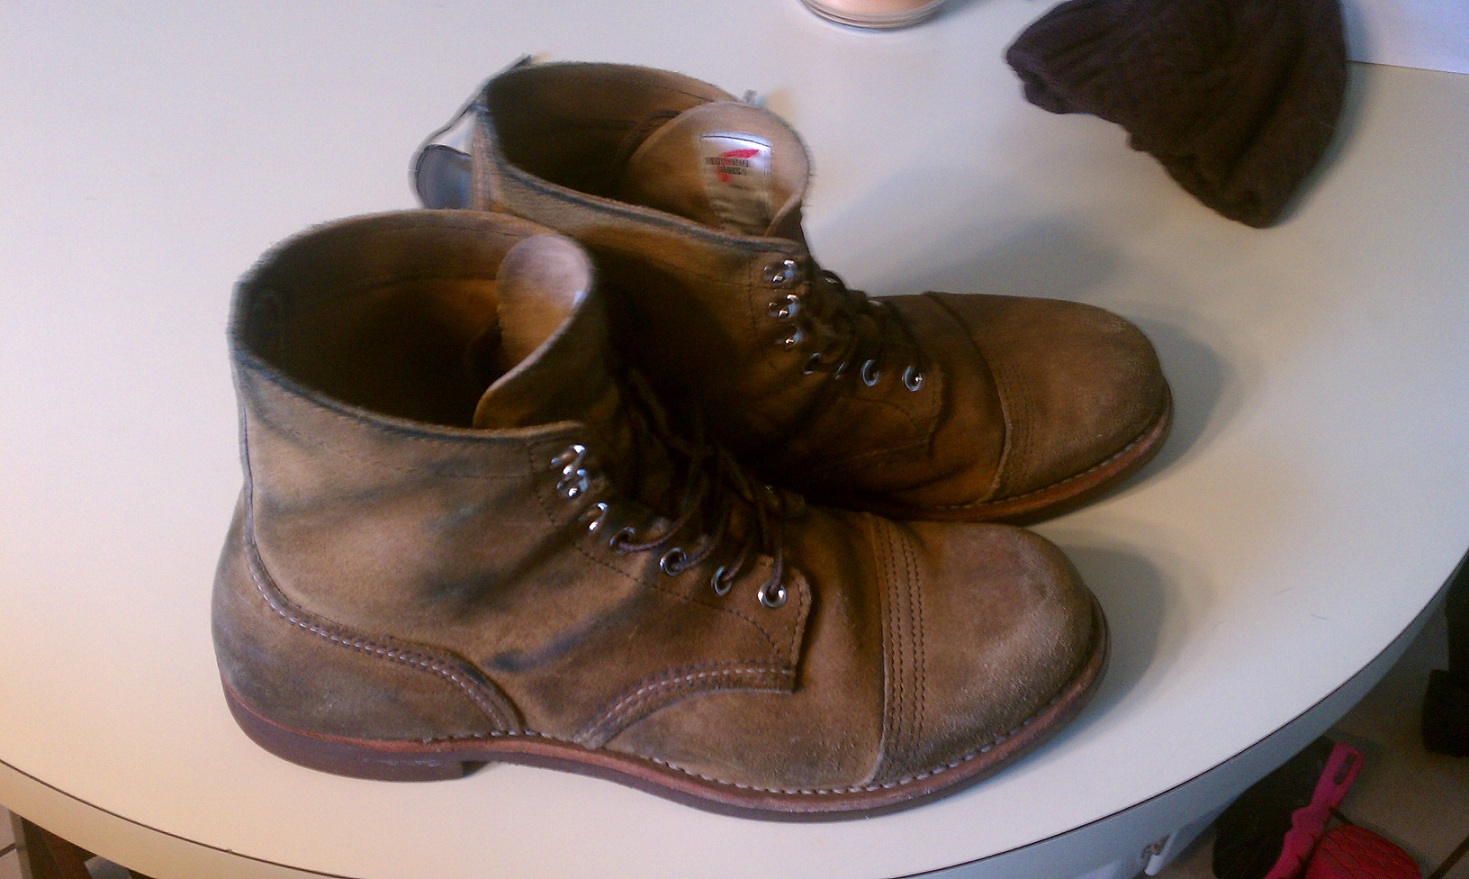 Red Wing Iron Ranger Boots - what's the dilly yo? | Page 9 | Styleforum